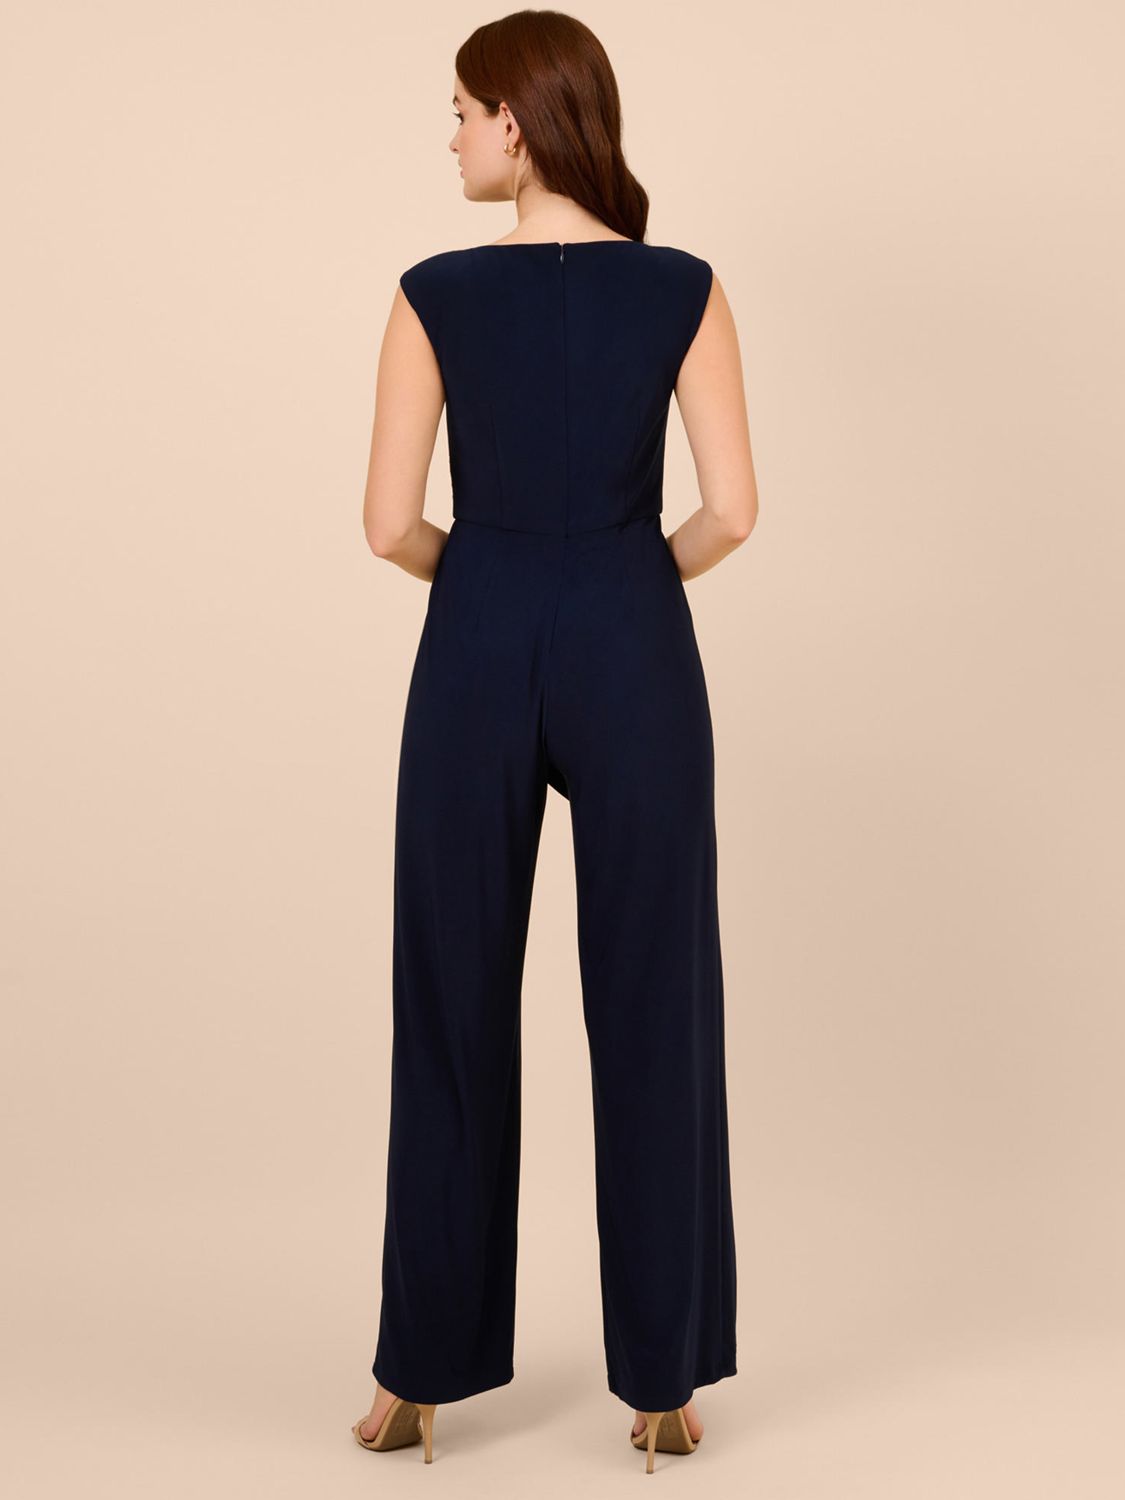 Adrianna Papell Jersey Draped Jumpsuit, Midnight at John Lewis & Partners